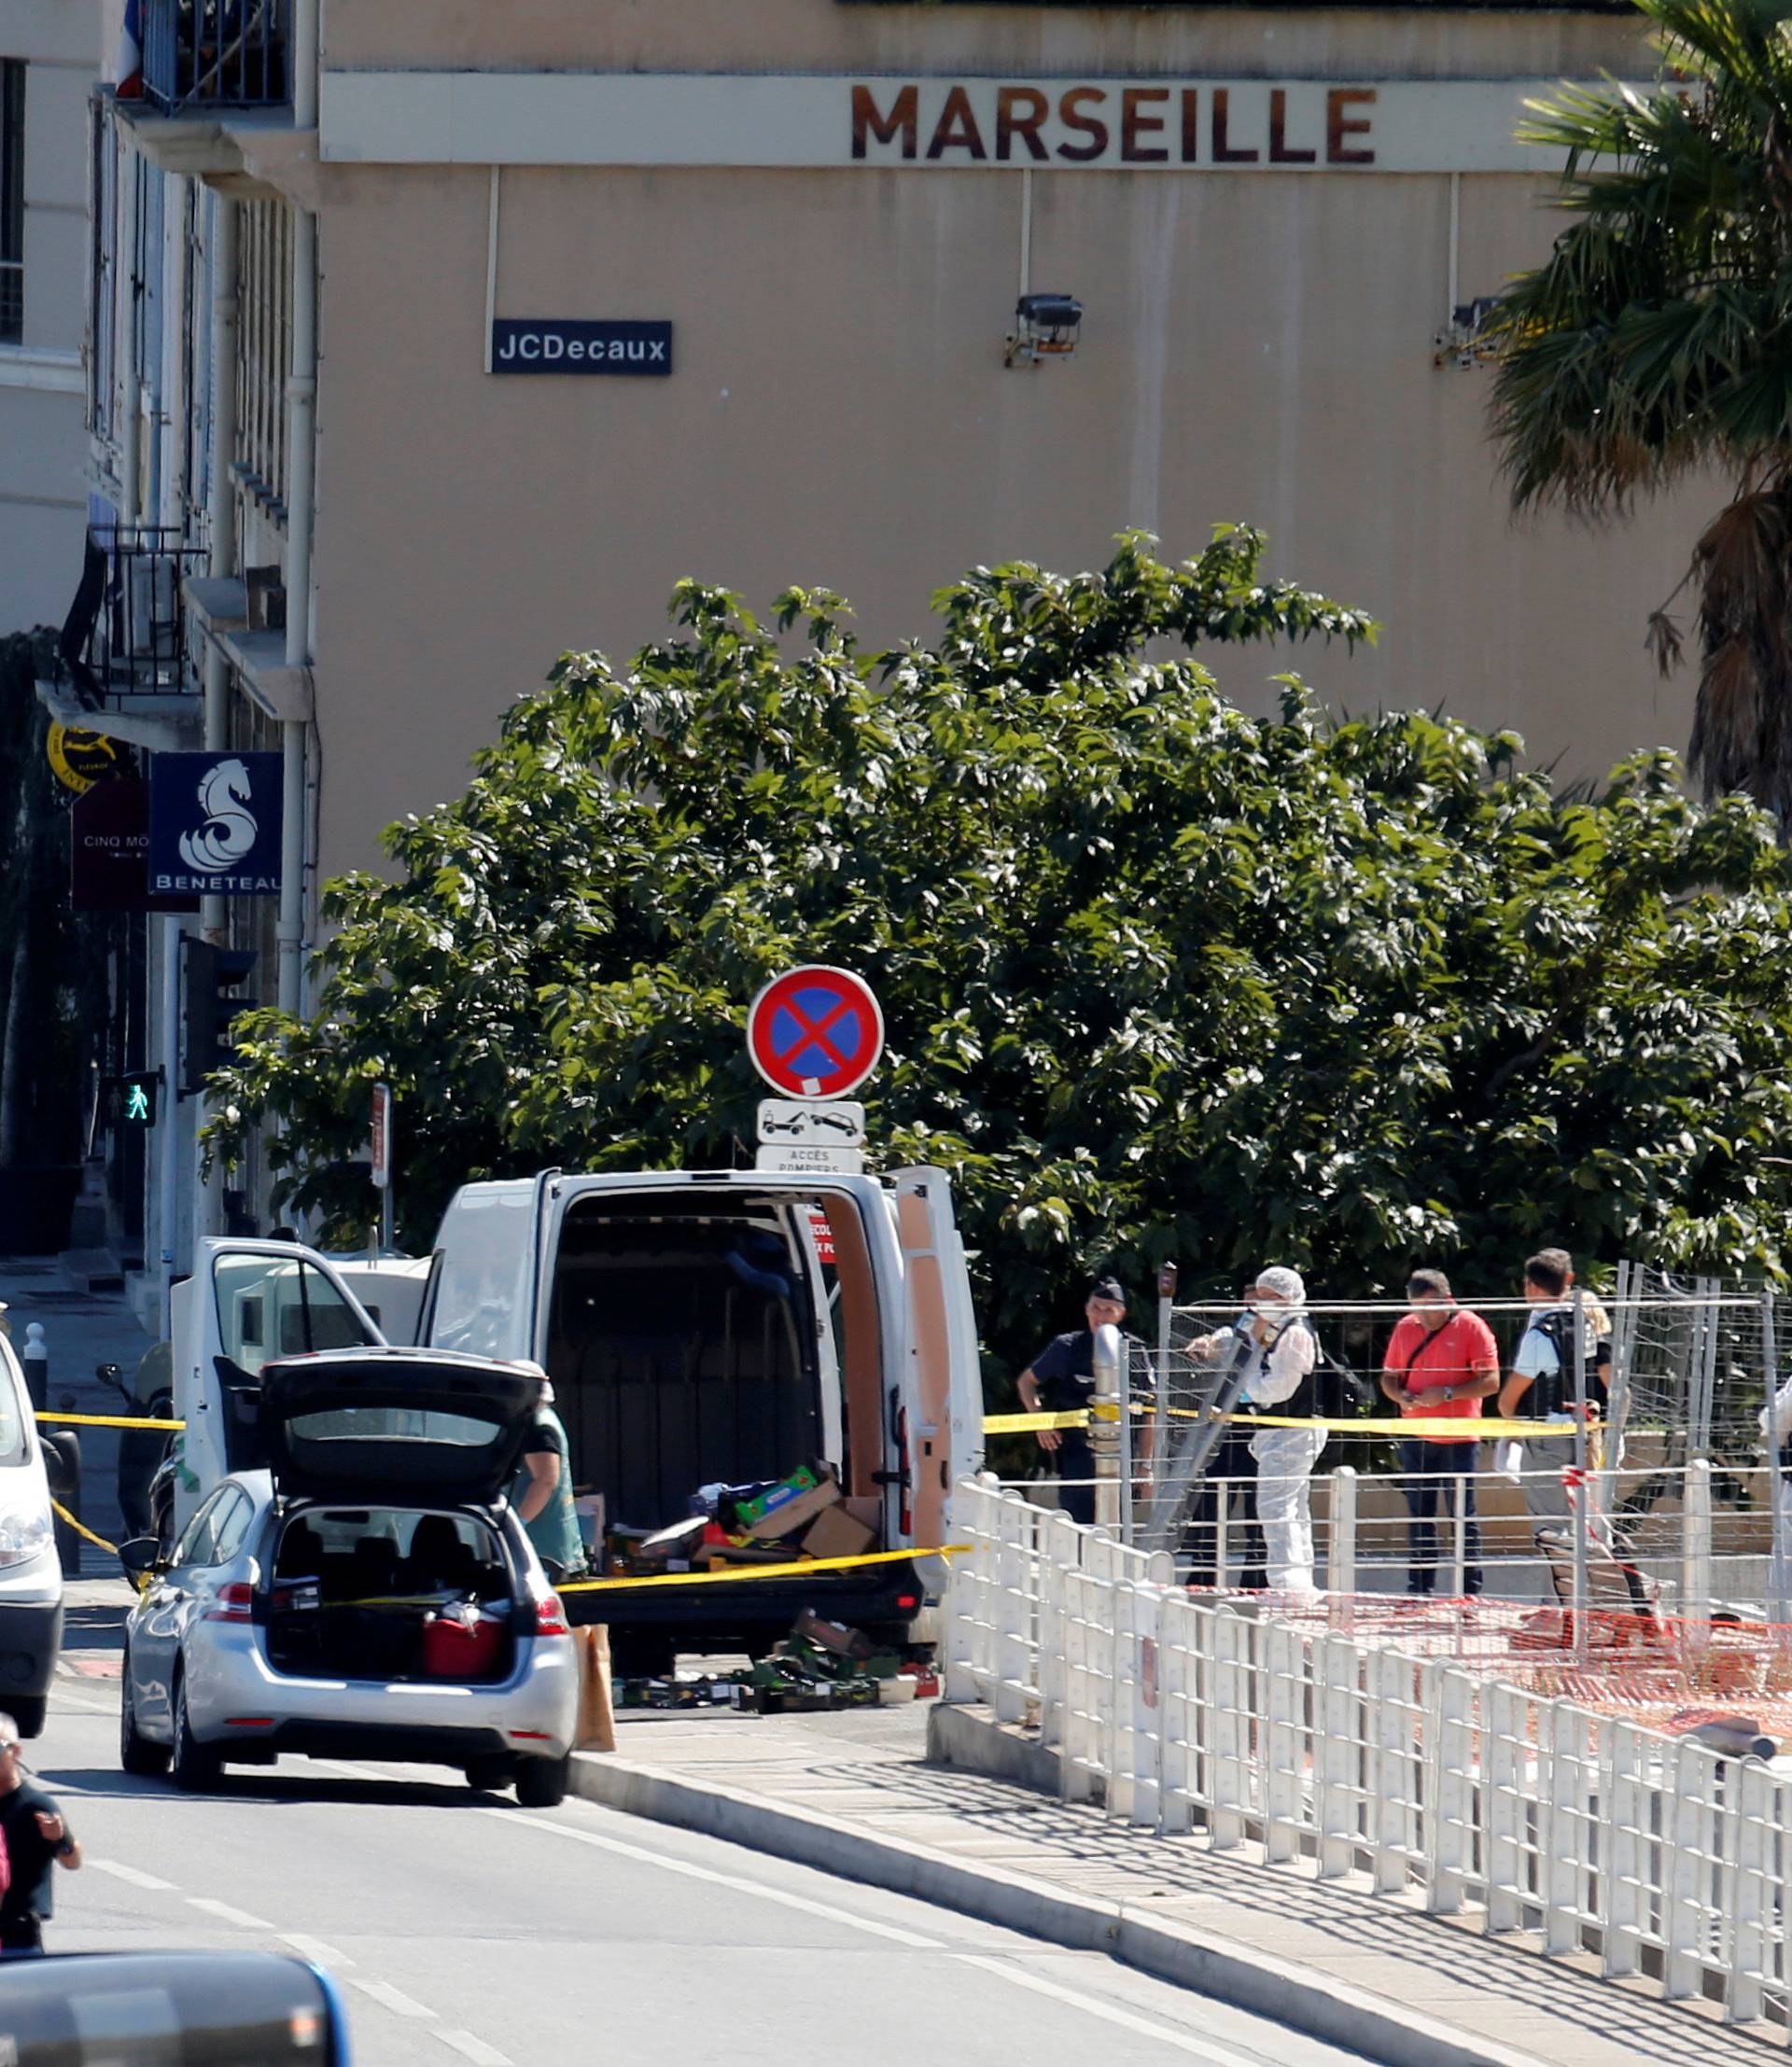 French police conduct their investigatation in the French port city of Marseille after one person was killed and another injured after a vehicle crashed into two bus shelters